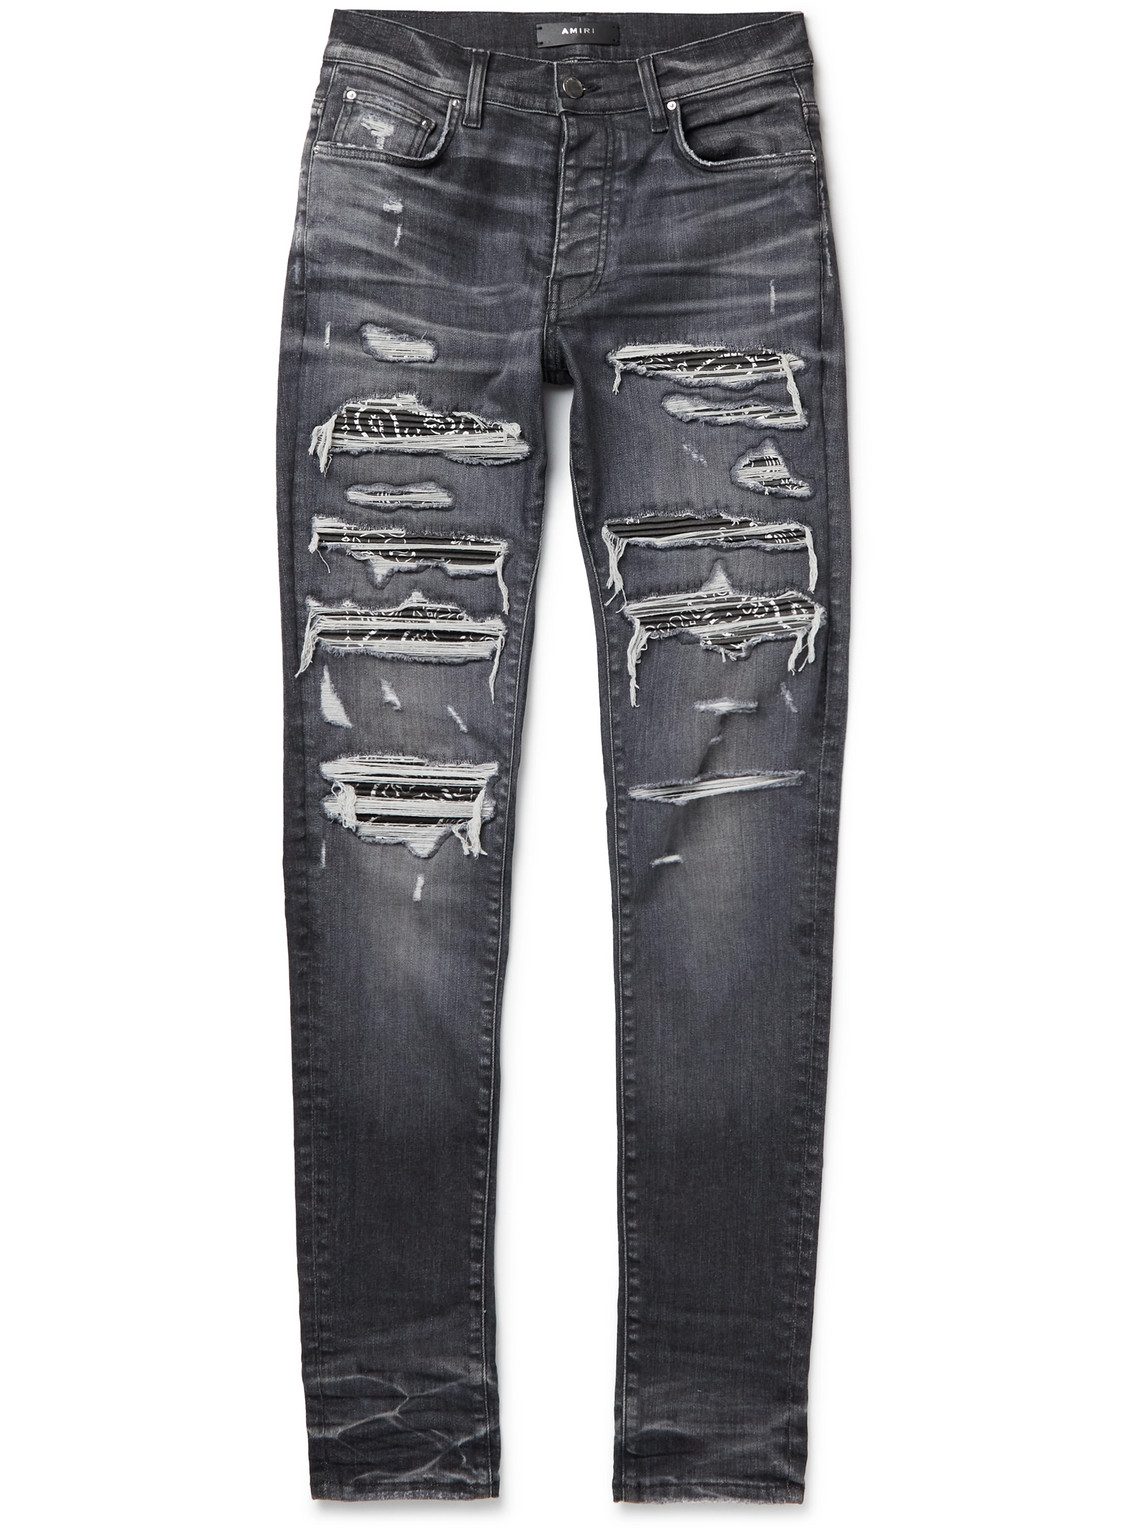 Thrasher Skinny-Fit Panelled Distressed Jeans